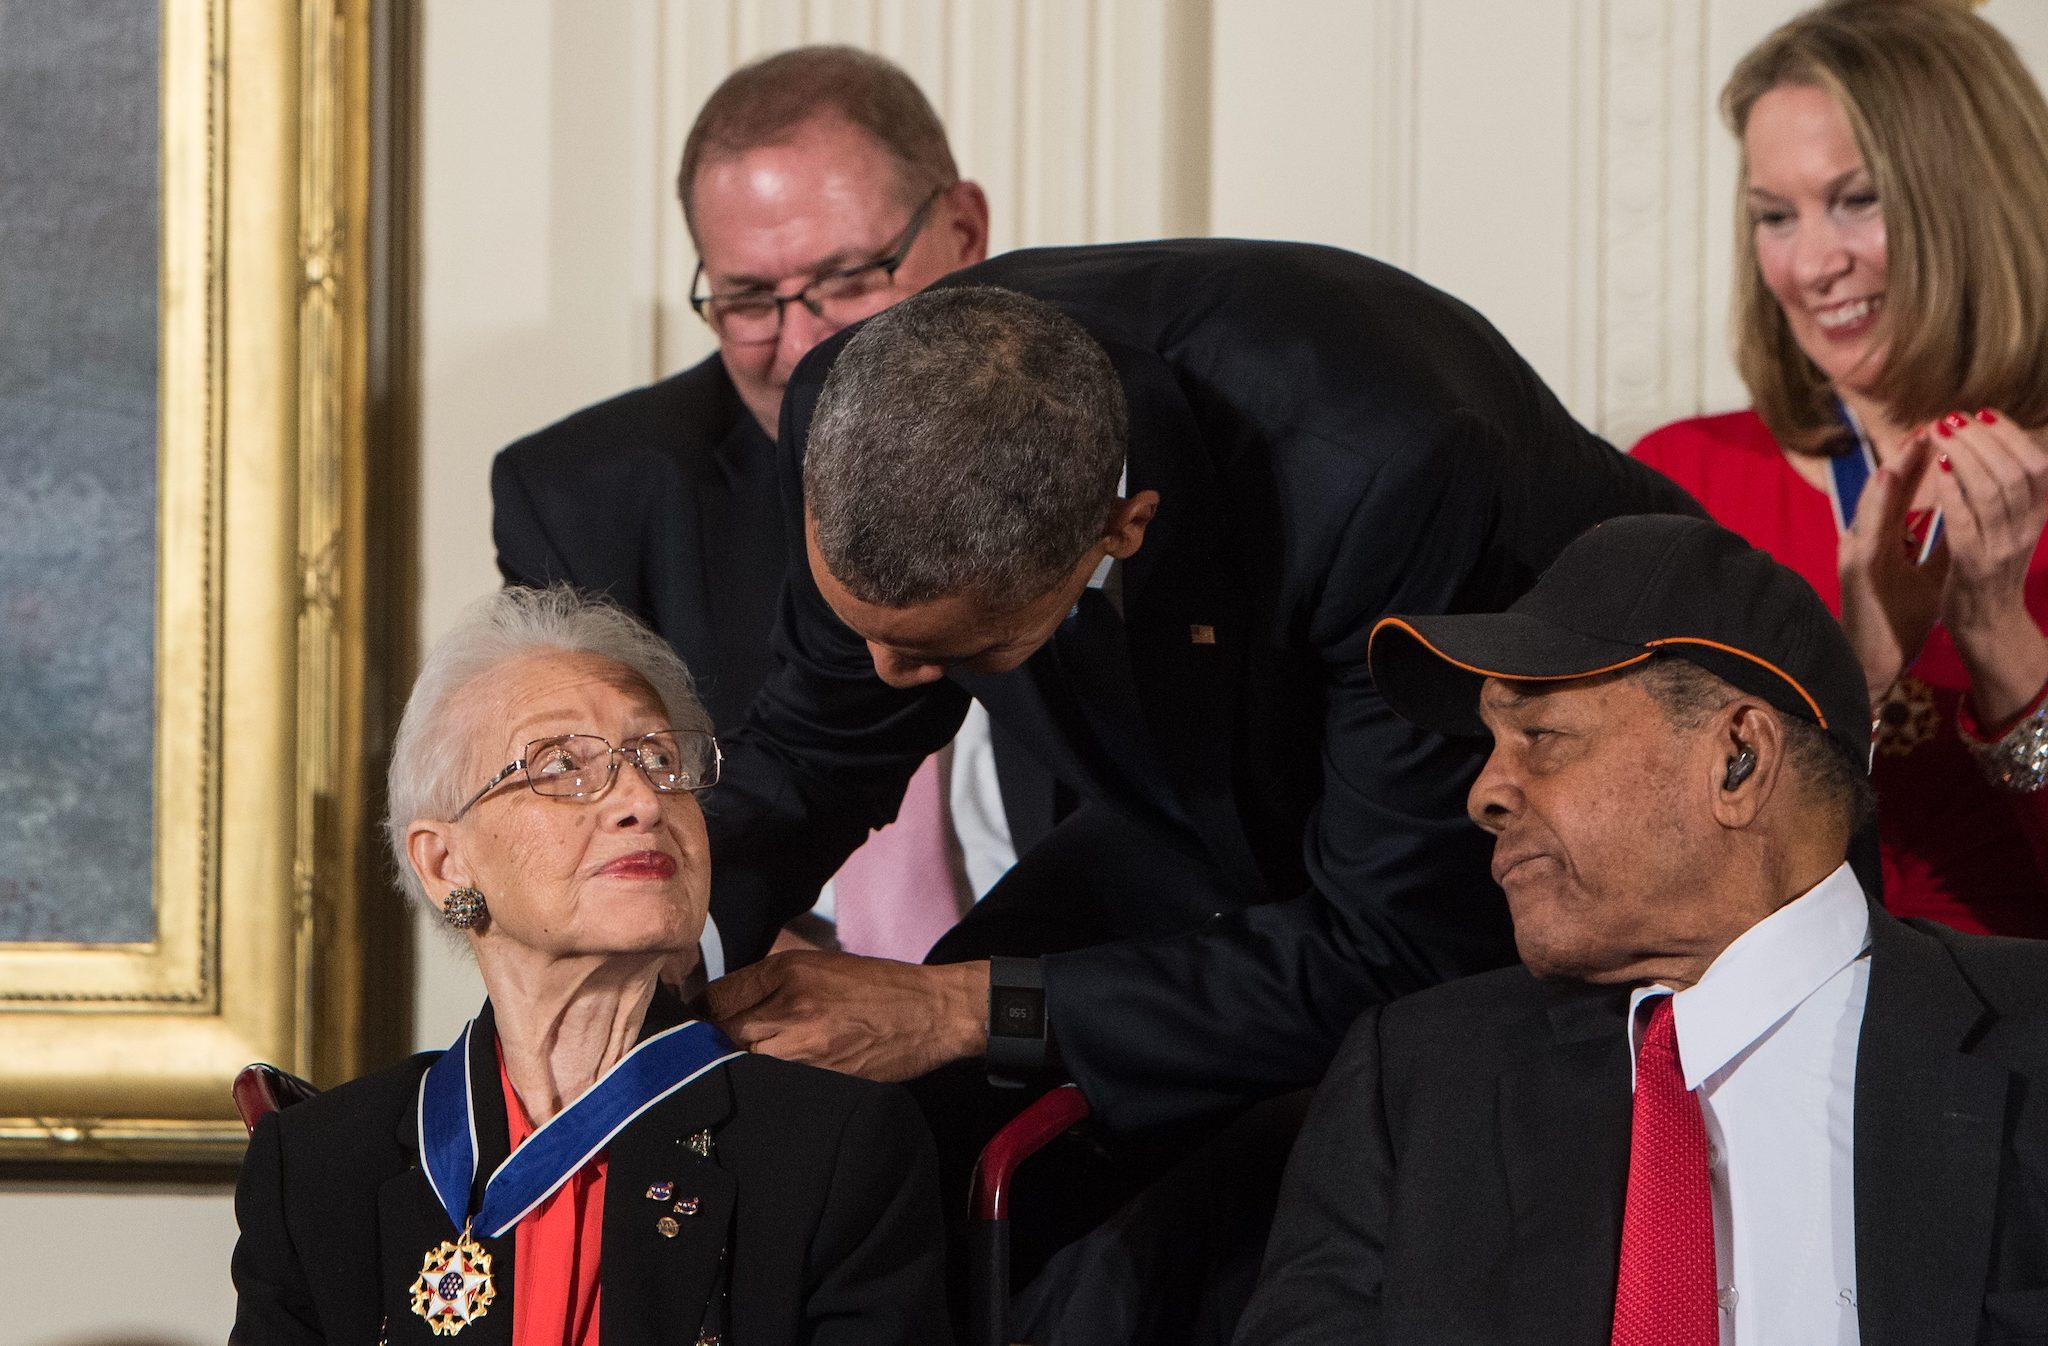 US President Barack Obama presents the Presidential Medal of Freedom to NASA mathematician and physicist Katherine Johnson at the White House in Washington, DC, on November 24, 2015